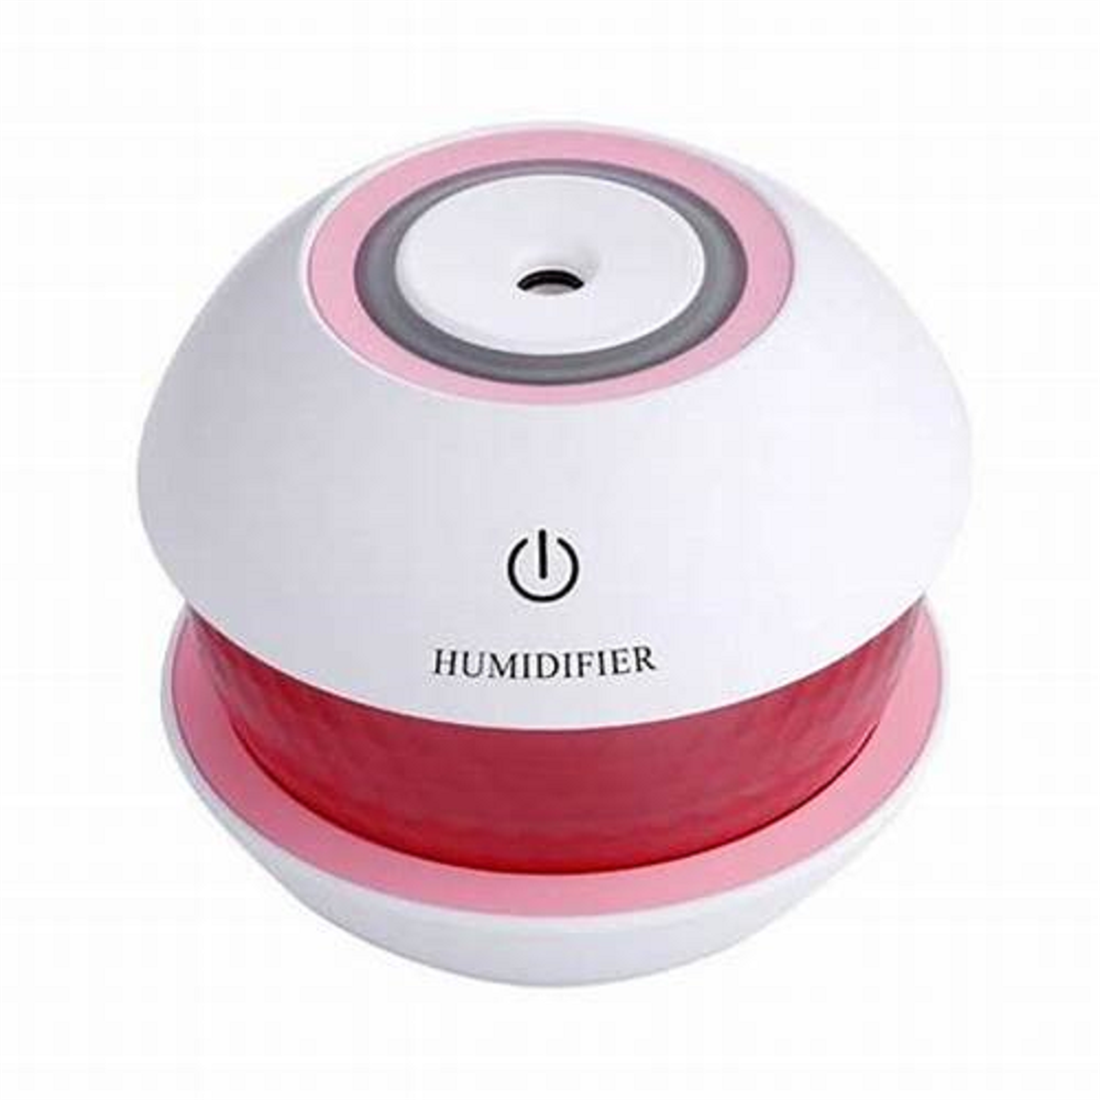 Humidifier Magic Diamond with USB Micro cable color Pink white